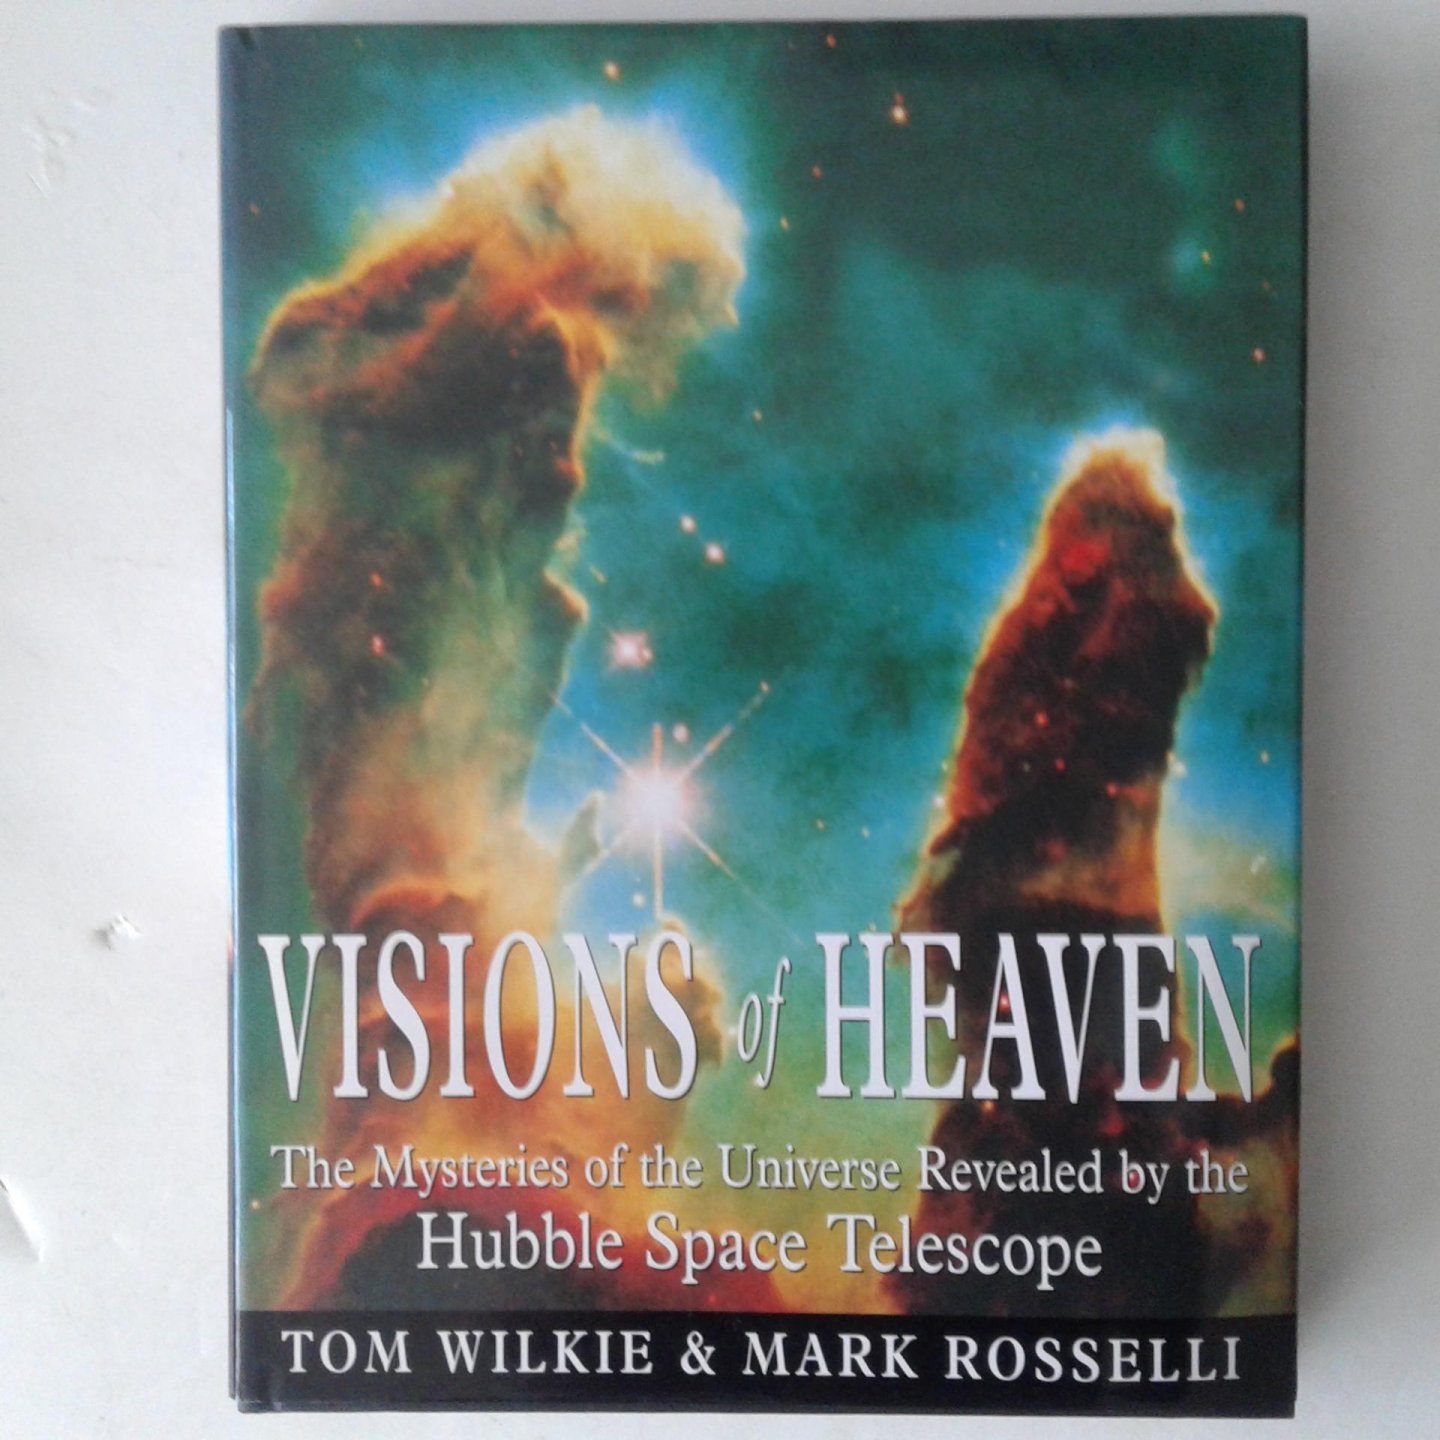 Wilkie, Tom ; Rosselli, Mark - Visions of Heaven ; The Mysteries ofvthe Universe Revealed by the Hubble Soace Telescope